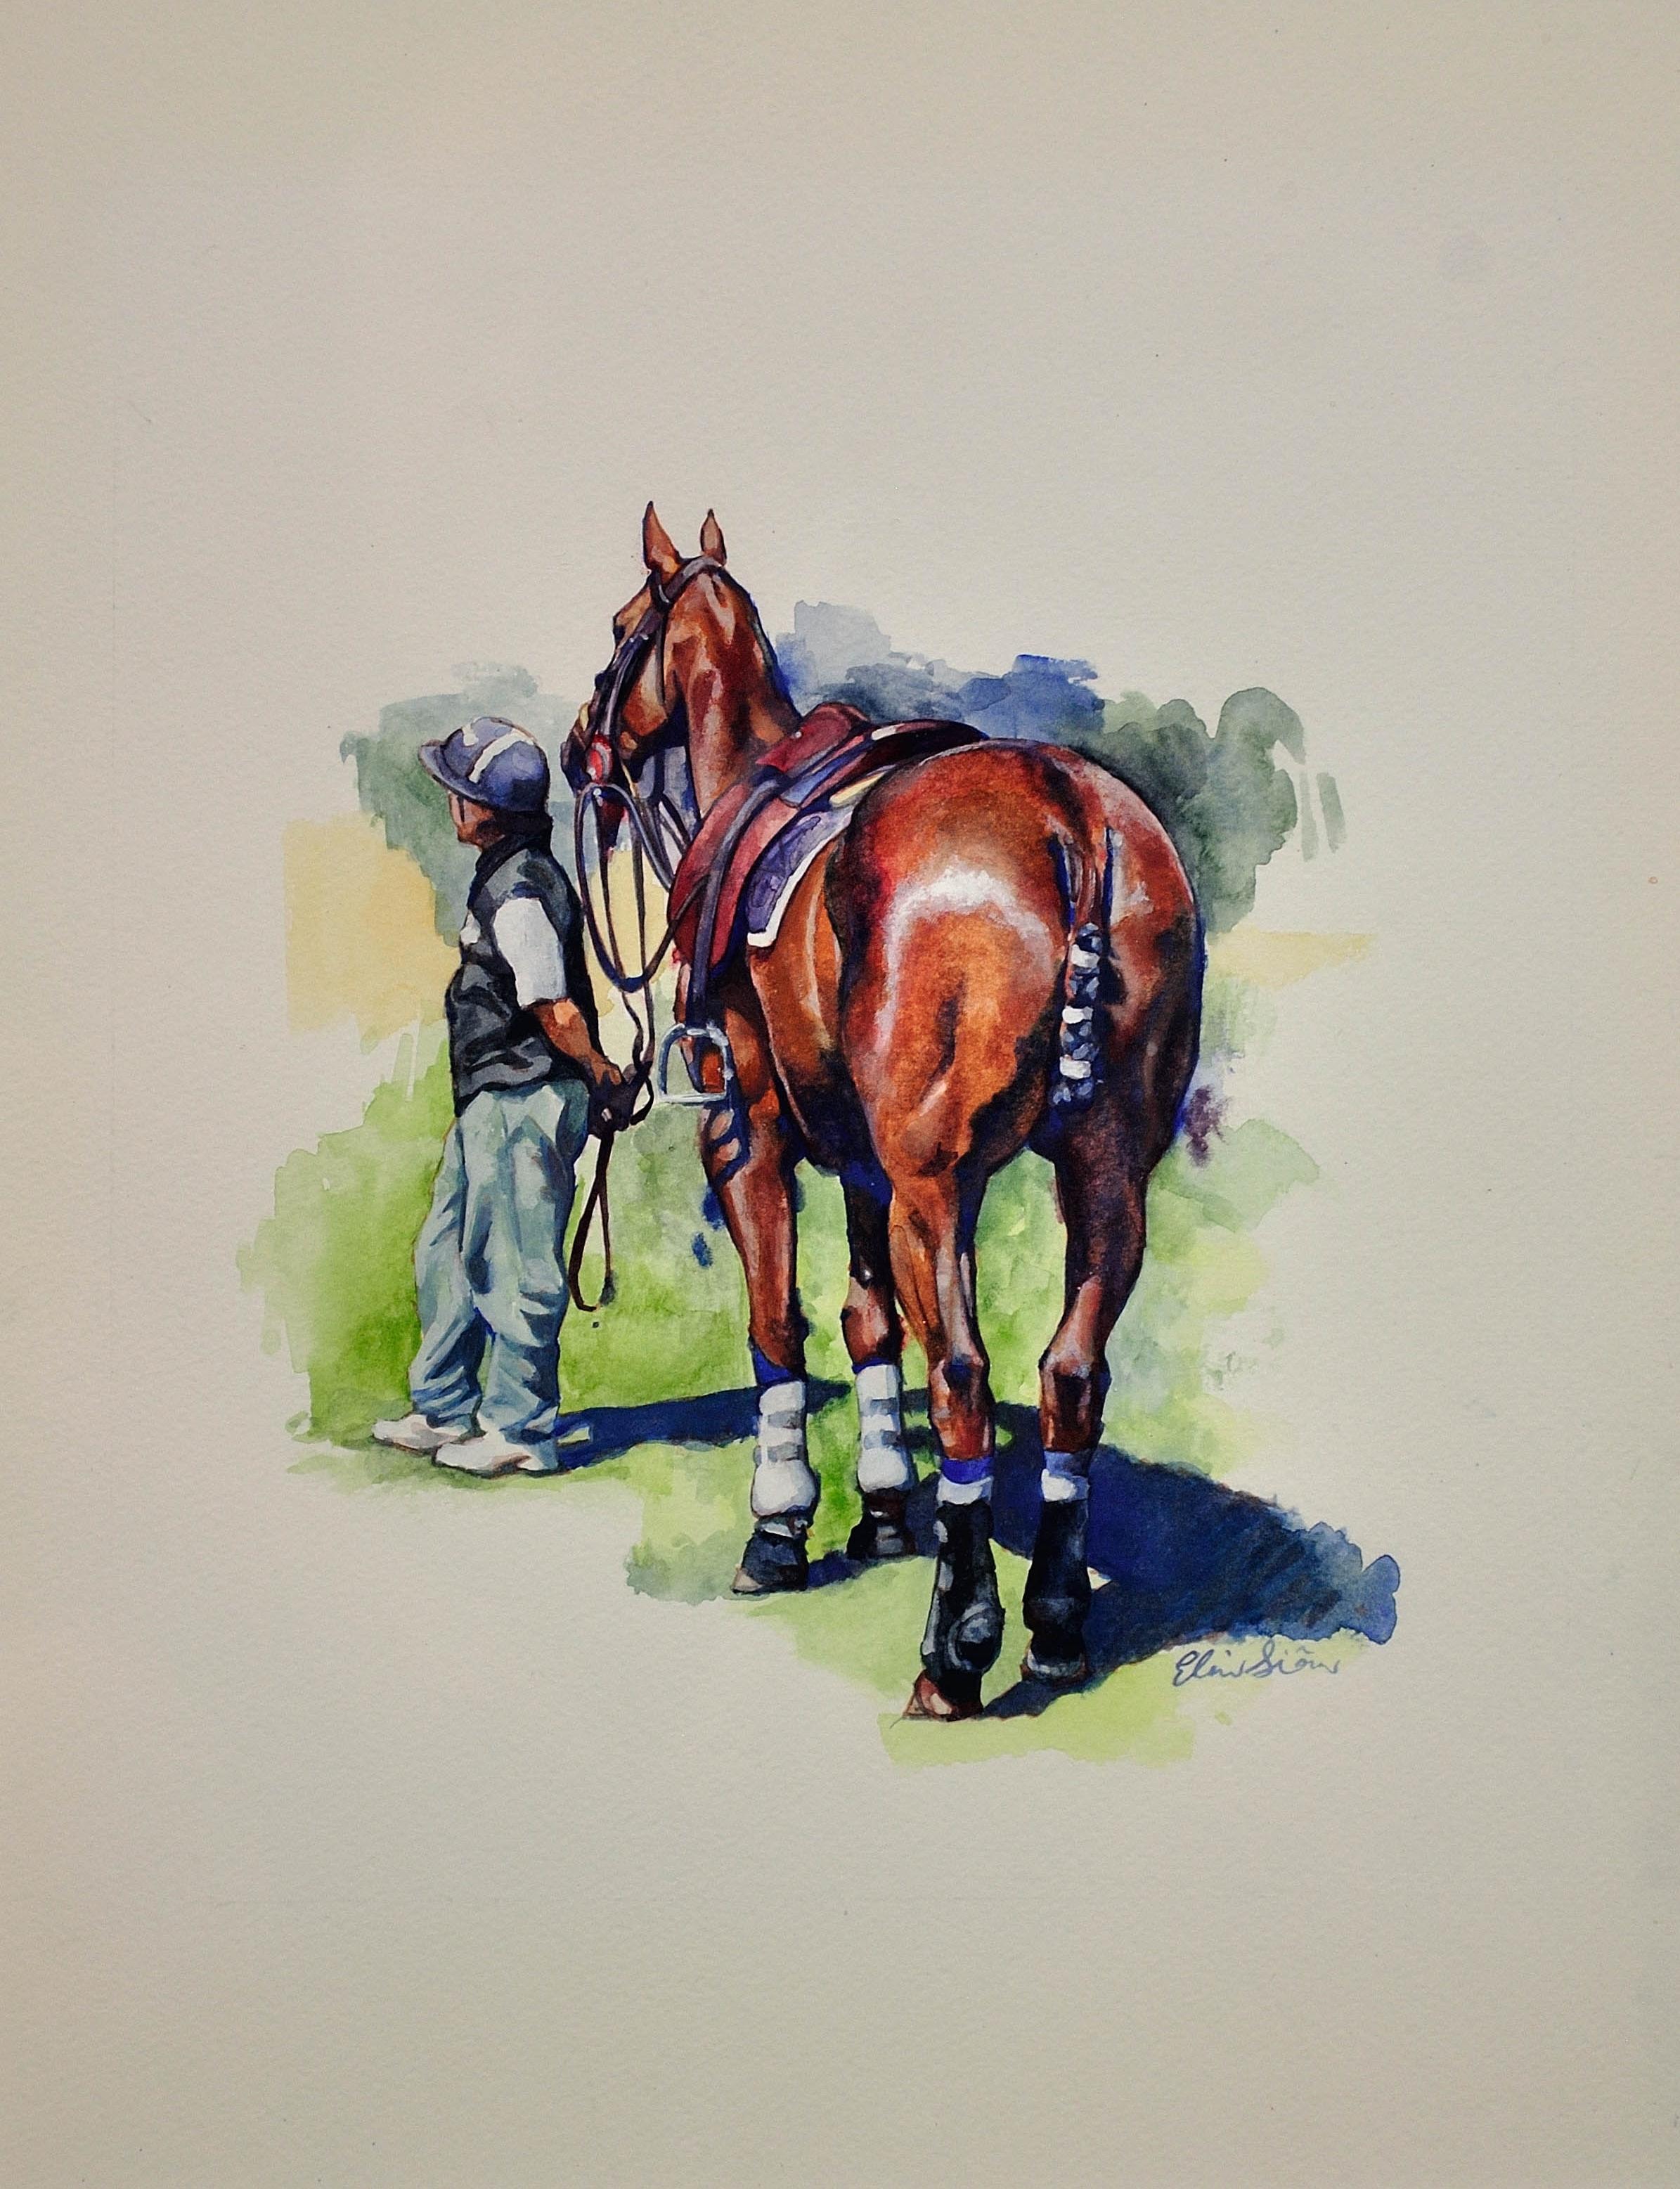 Polo Match, Cirencester, Player and Pony. Cotswolds. Parkland. Framed Watercolor - Art by Elin Sian Blake